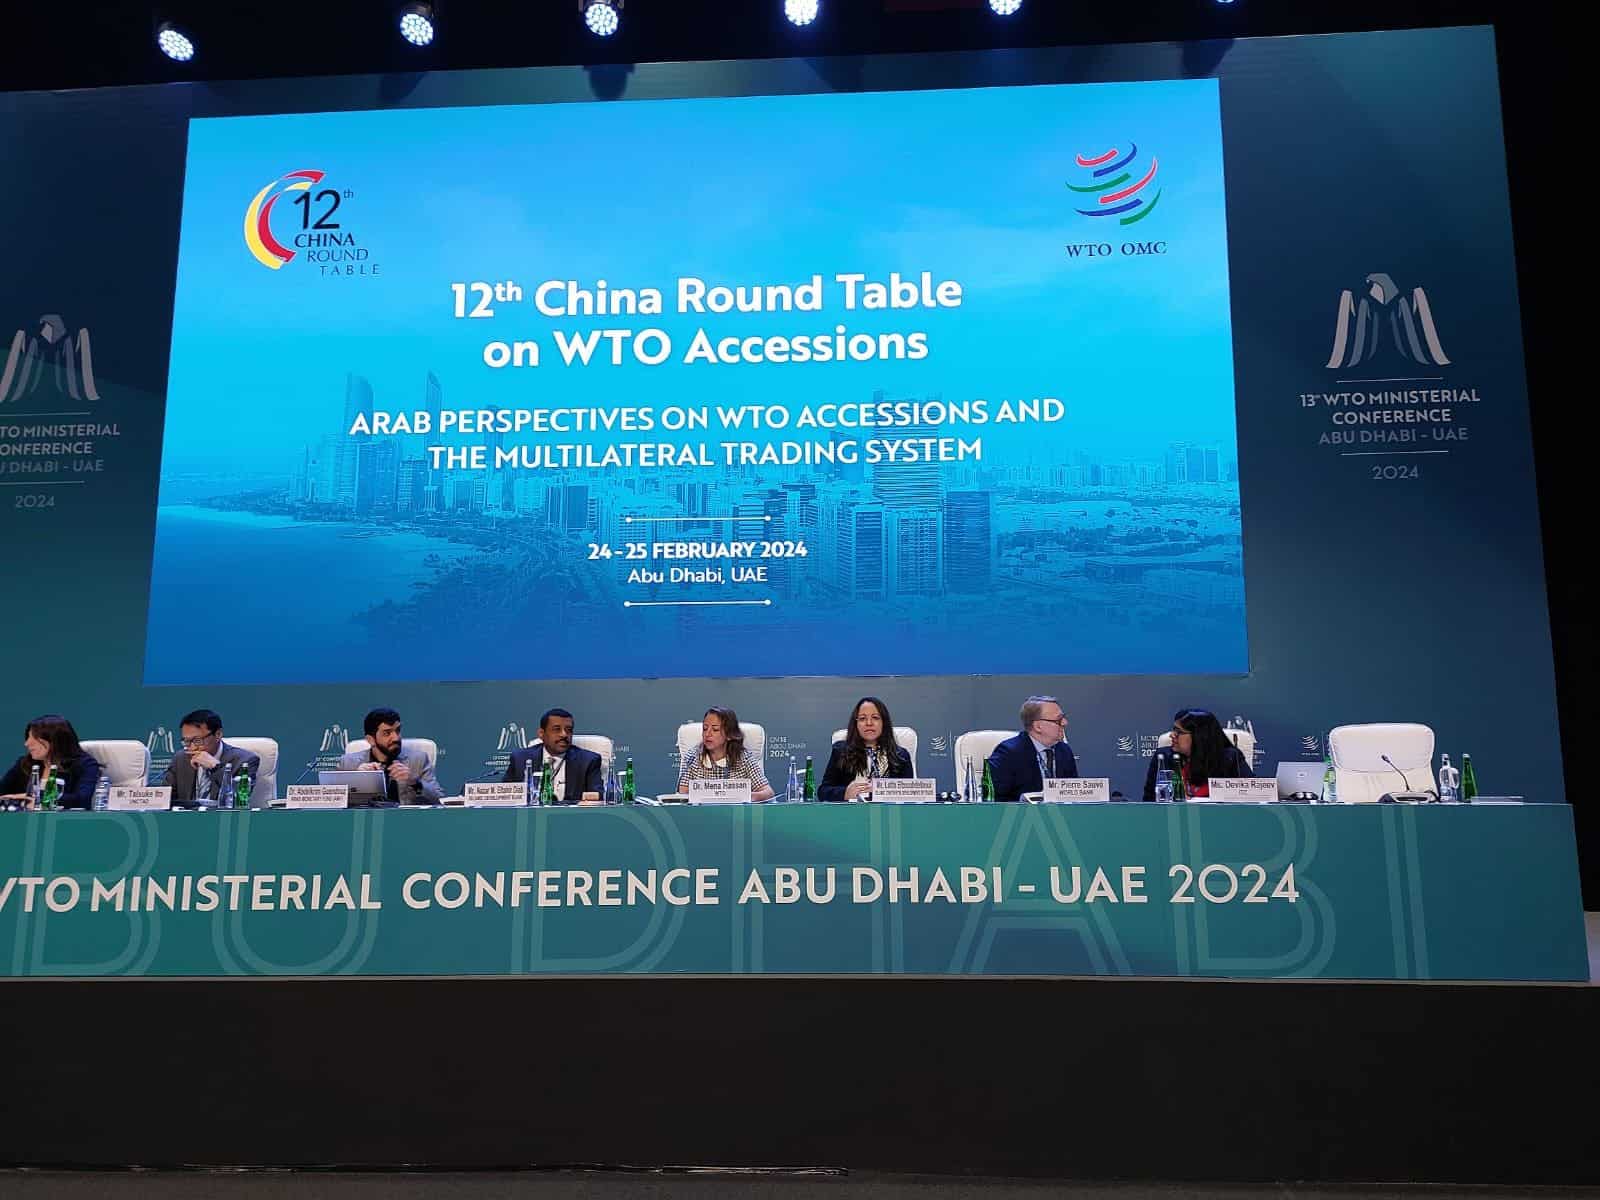 12th China Round Table on WTO Accession: Arab Perspectives on WTO Accessions  and The Multilateral Trading System